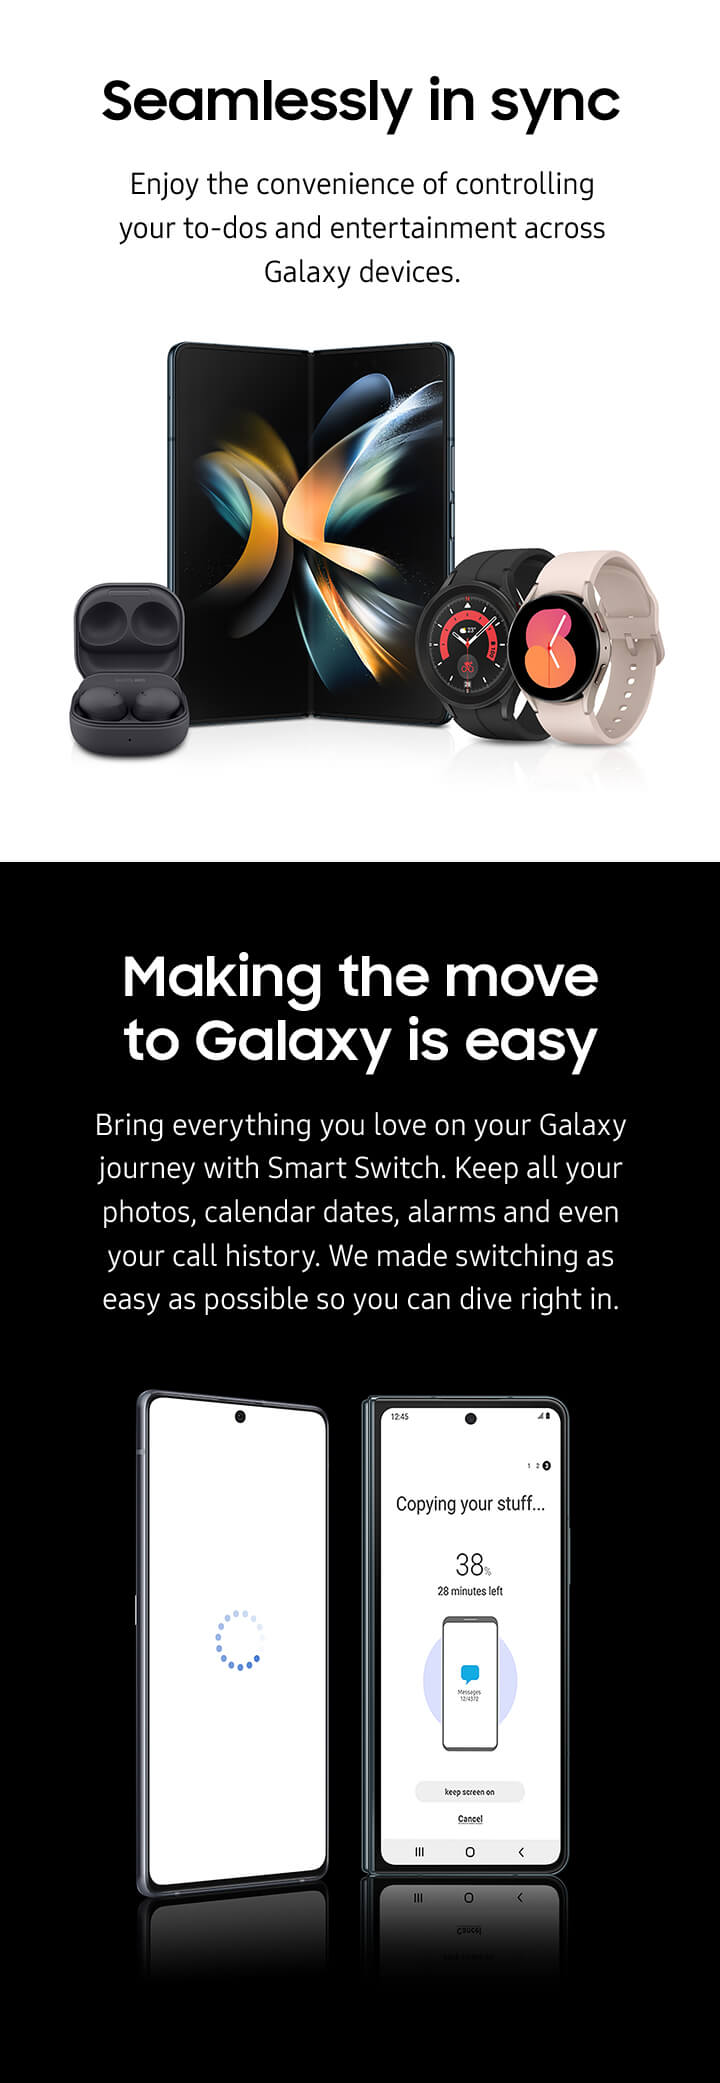 Infographic] Do What You Love with the Galaxy S20 FE – Samsung